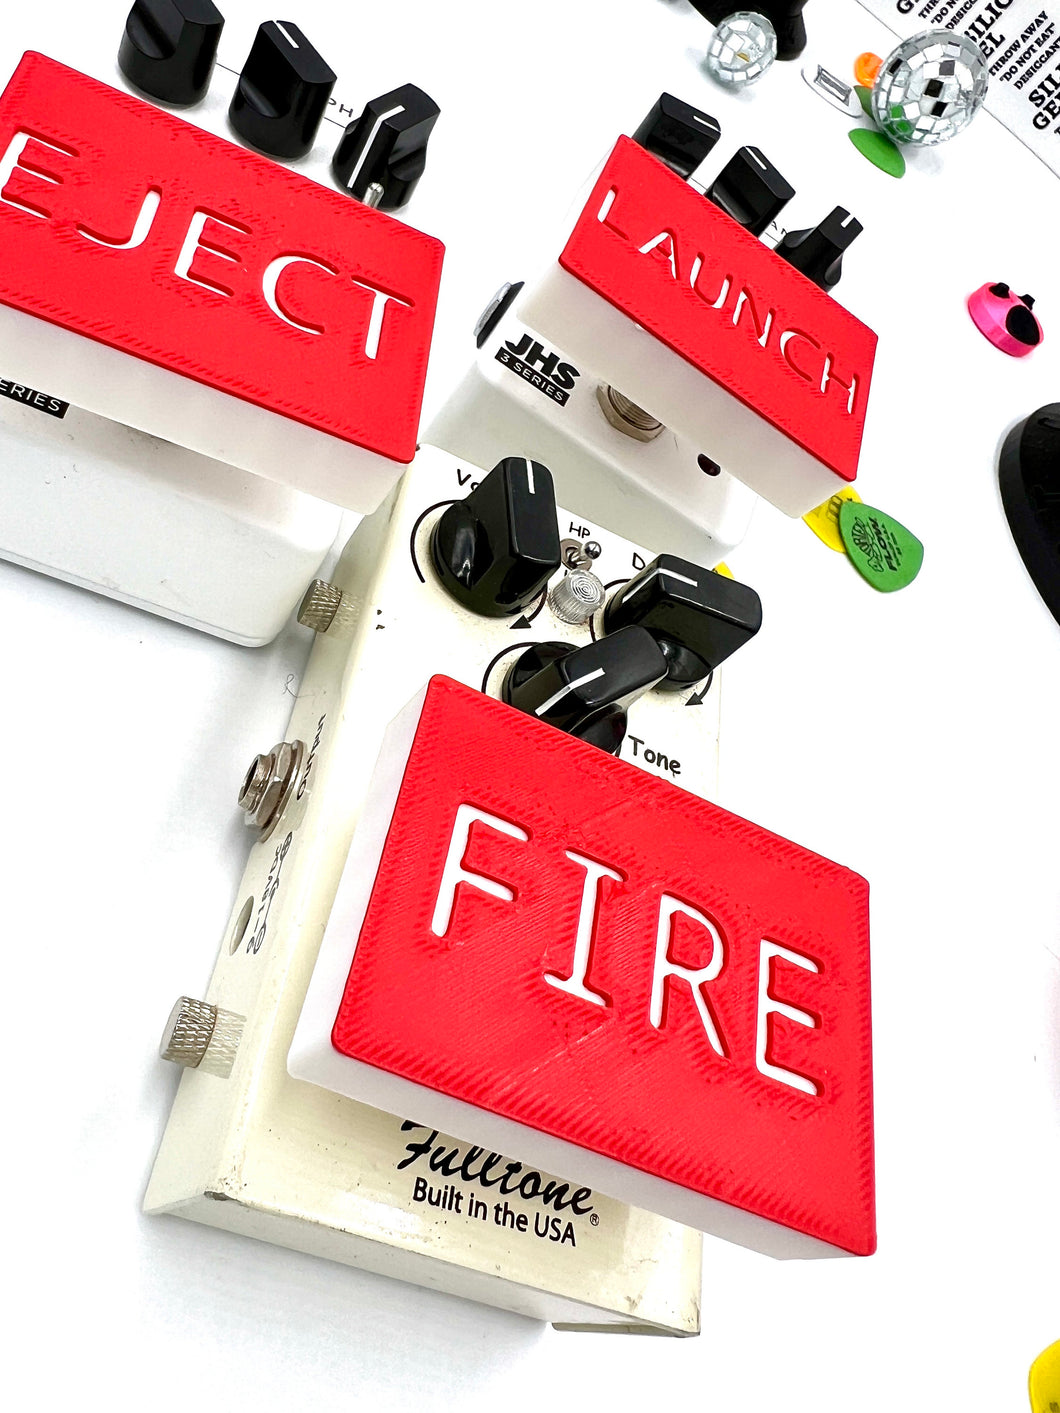 Eject, Fire and Launch Guitar Pedal Buttons